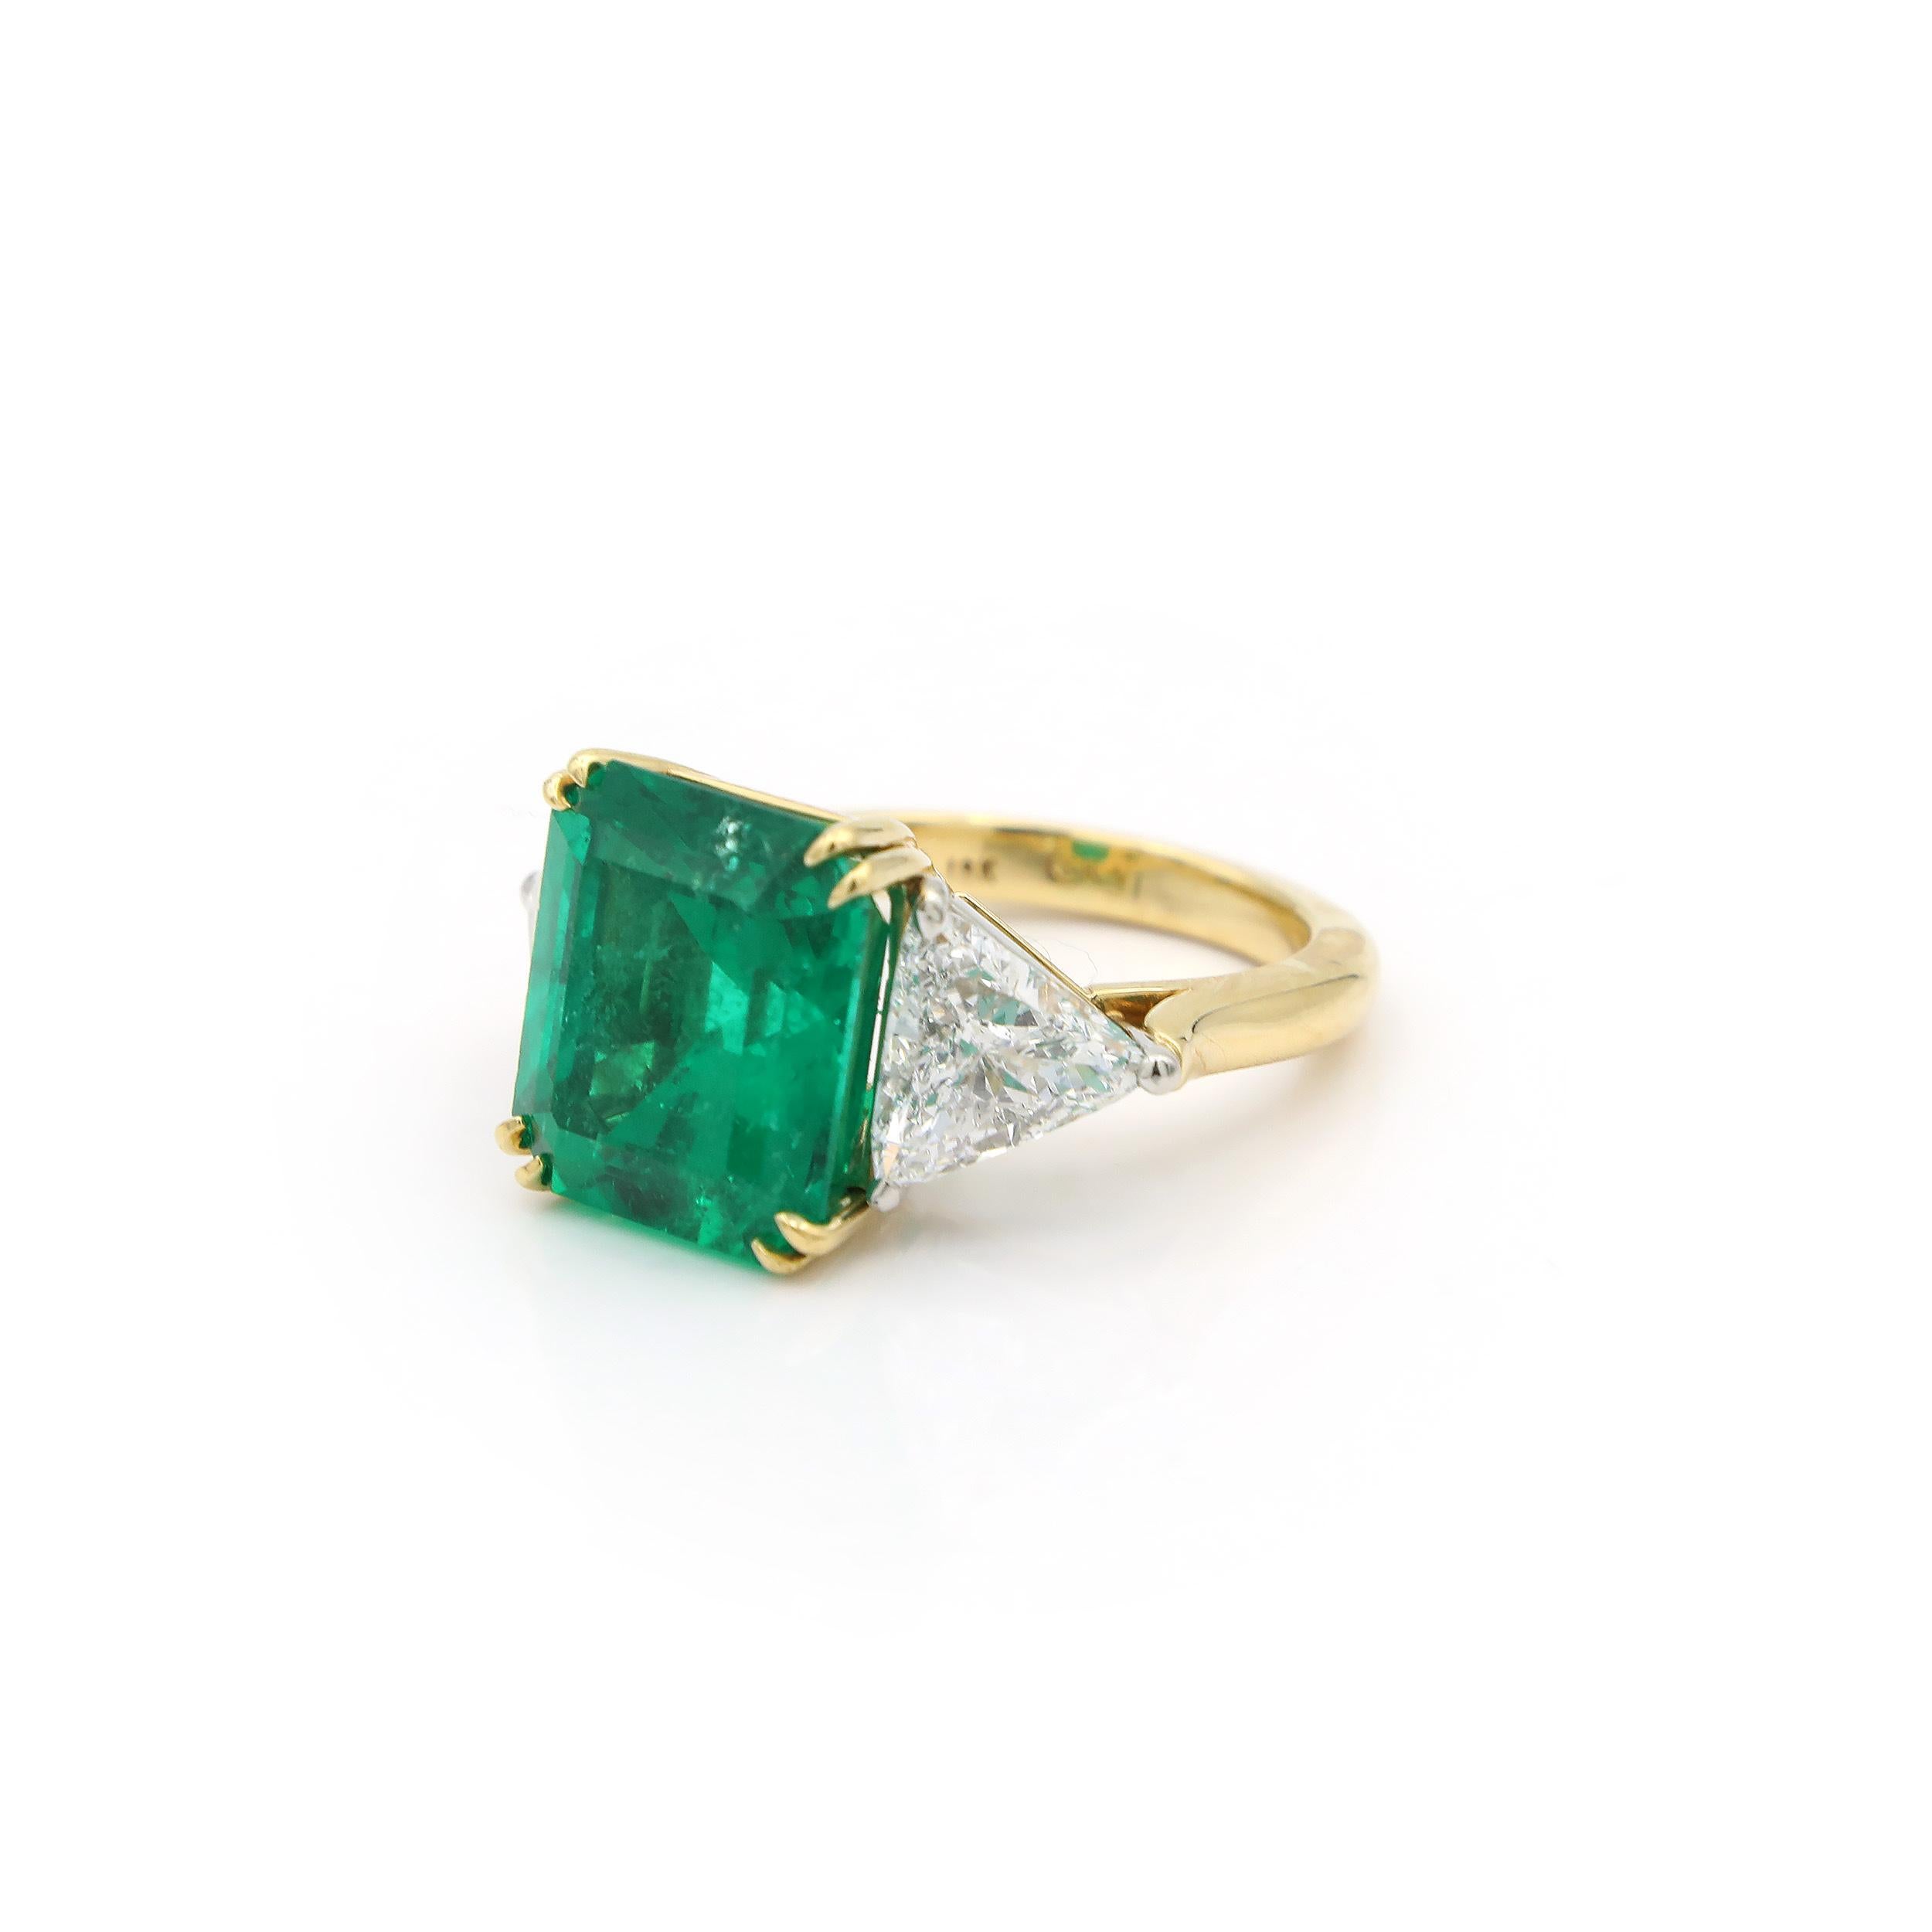 This is a stunning, exceptional piece, photographs don't give it justice!
It's an amazing 7.76 CT Emerald, Basket set and flanked by 2 trilliant cut diamonds. The emerald is vivid and transparent with inclusions. 
A truly romantic ring that warms